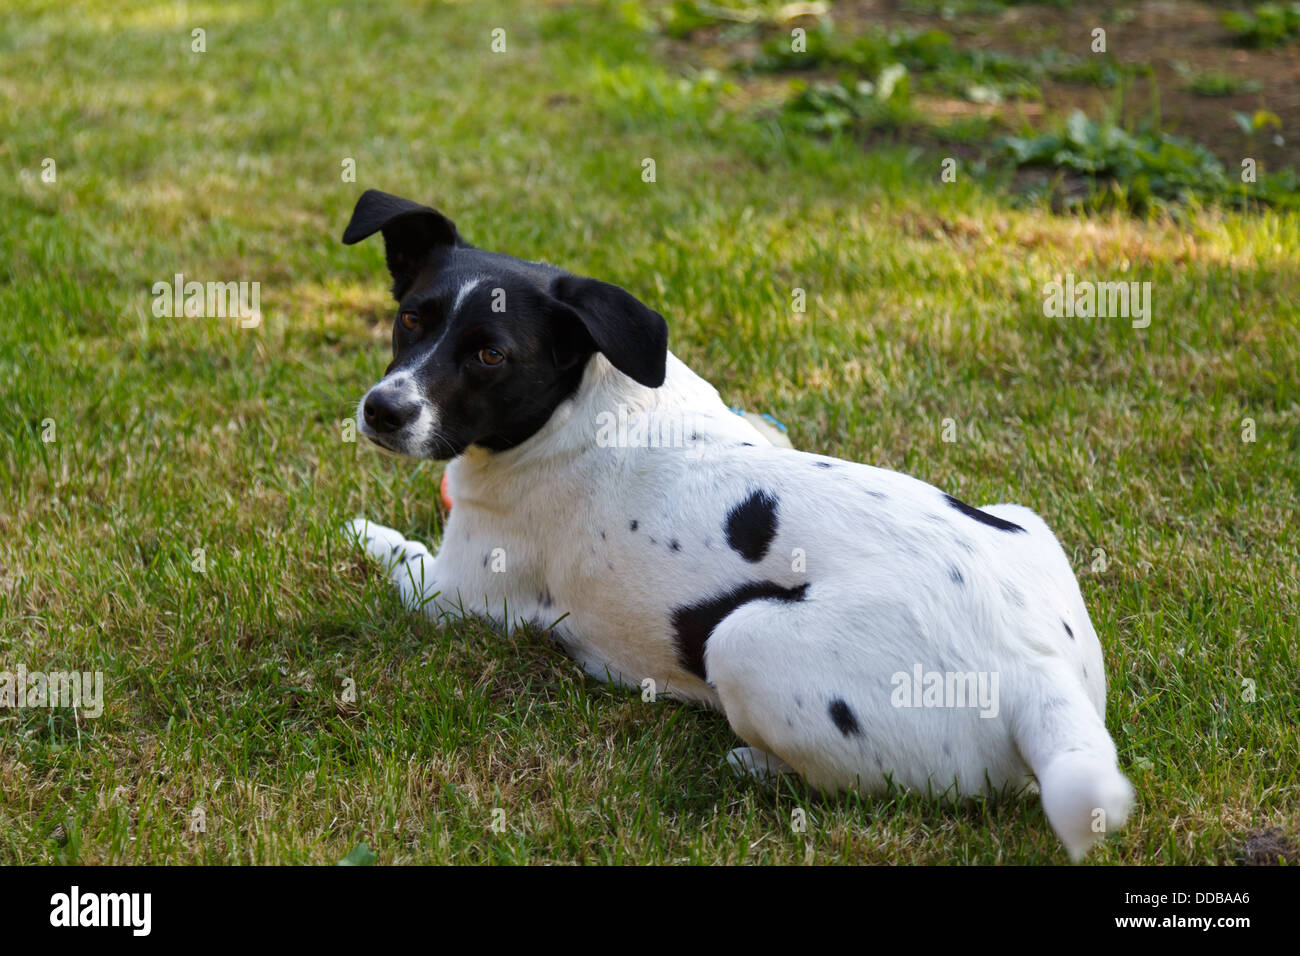 Emden, Germany, a dog sits in a garden on the lawn Stock Photo